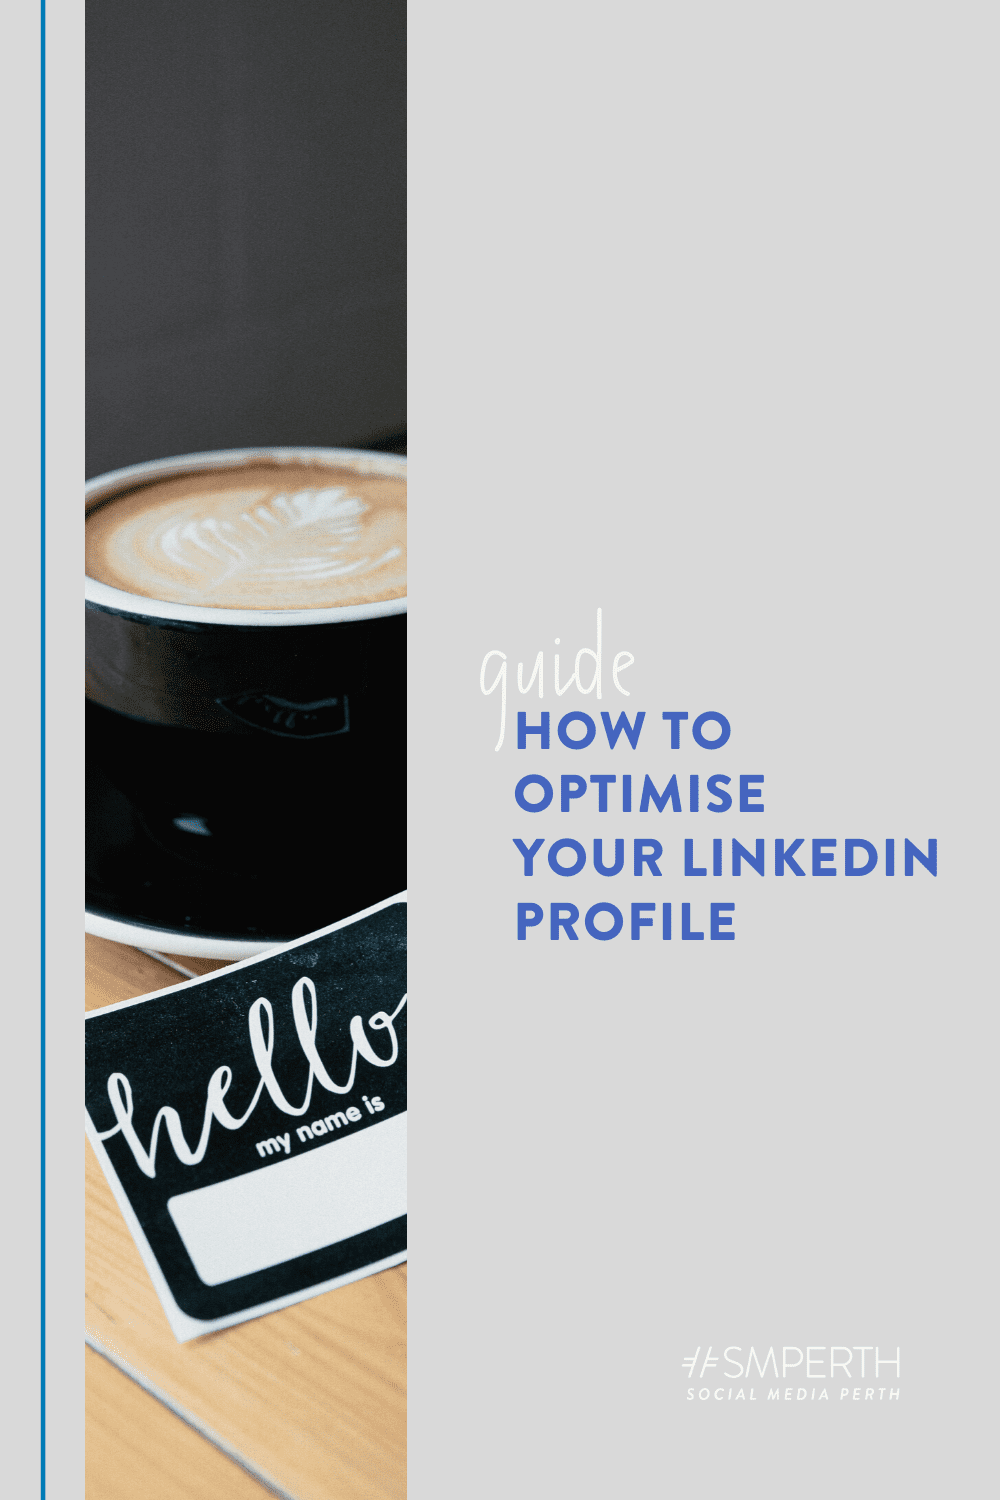 5 Tips to Optimise your LinkedIn Profile